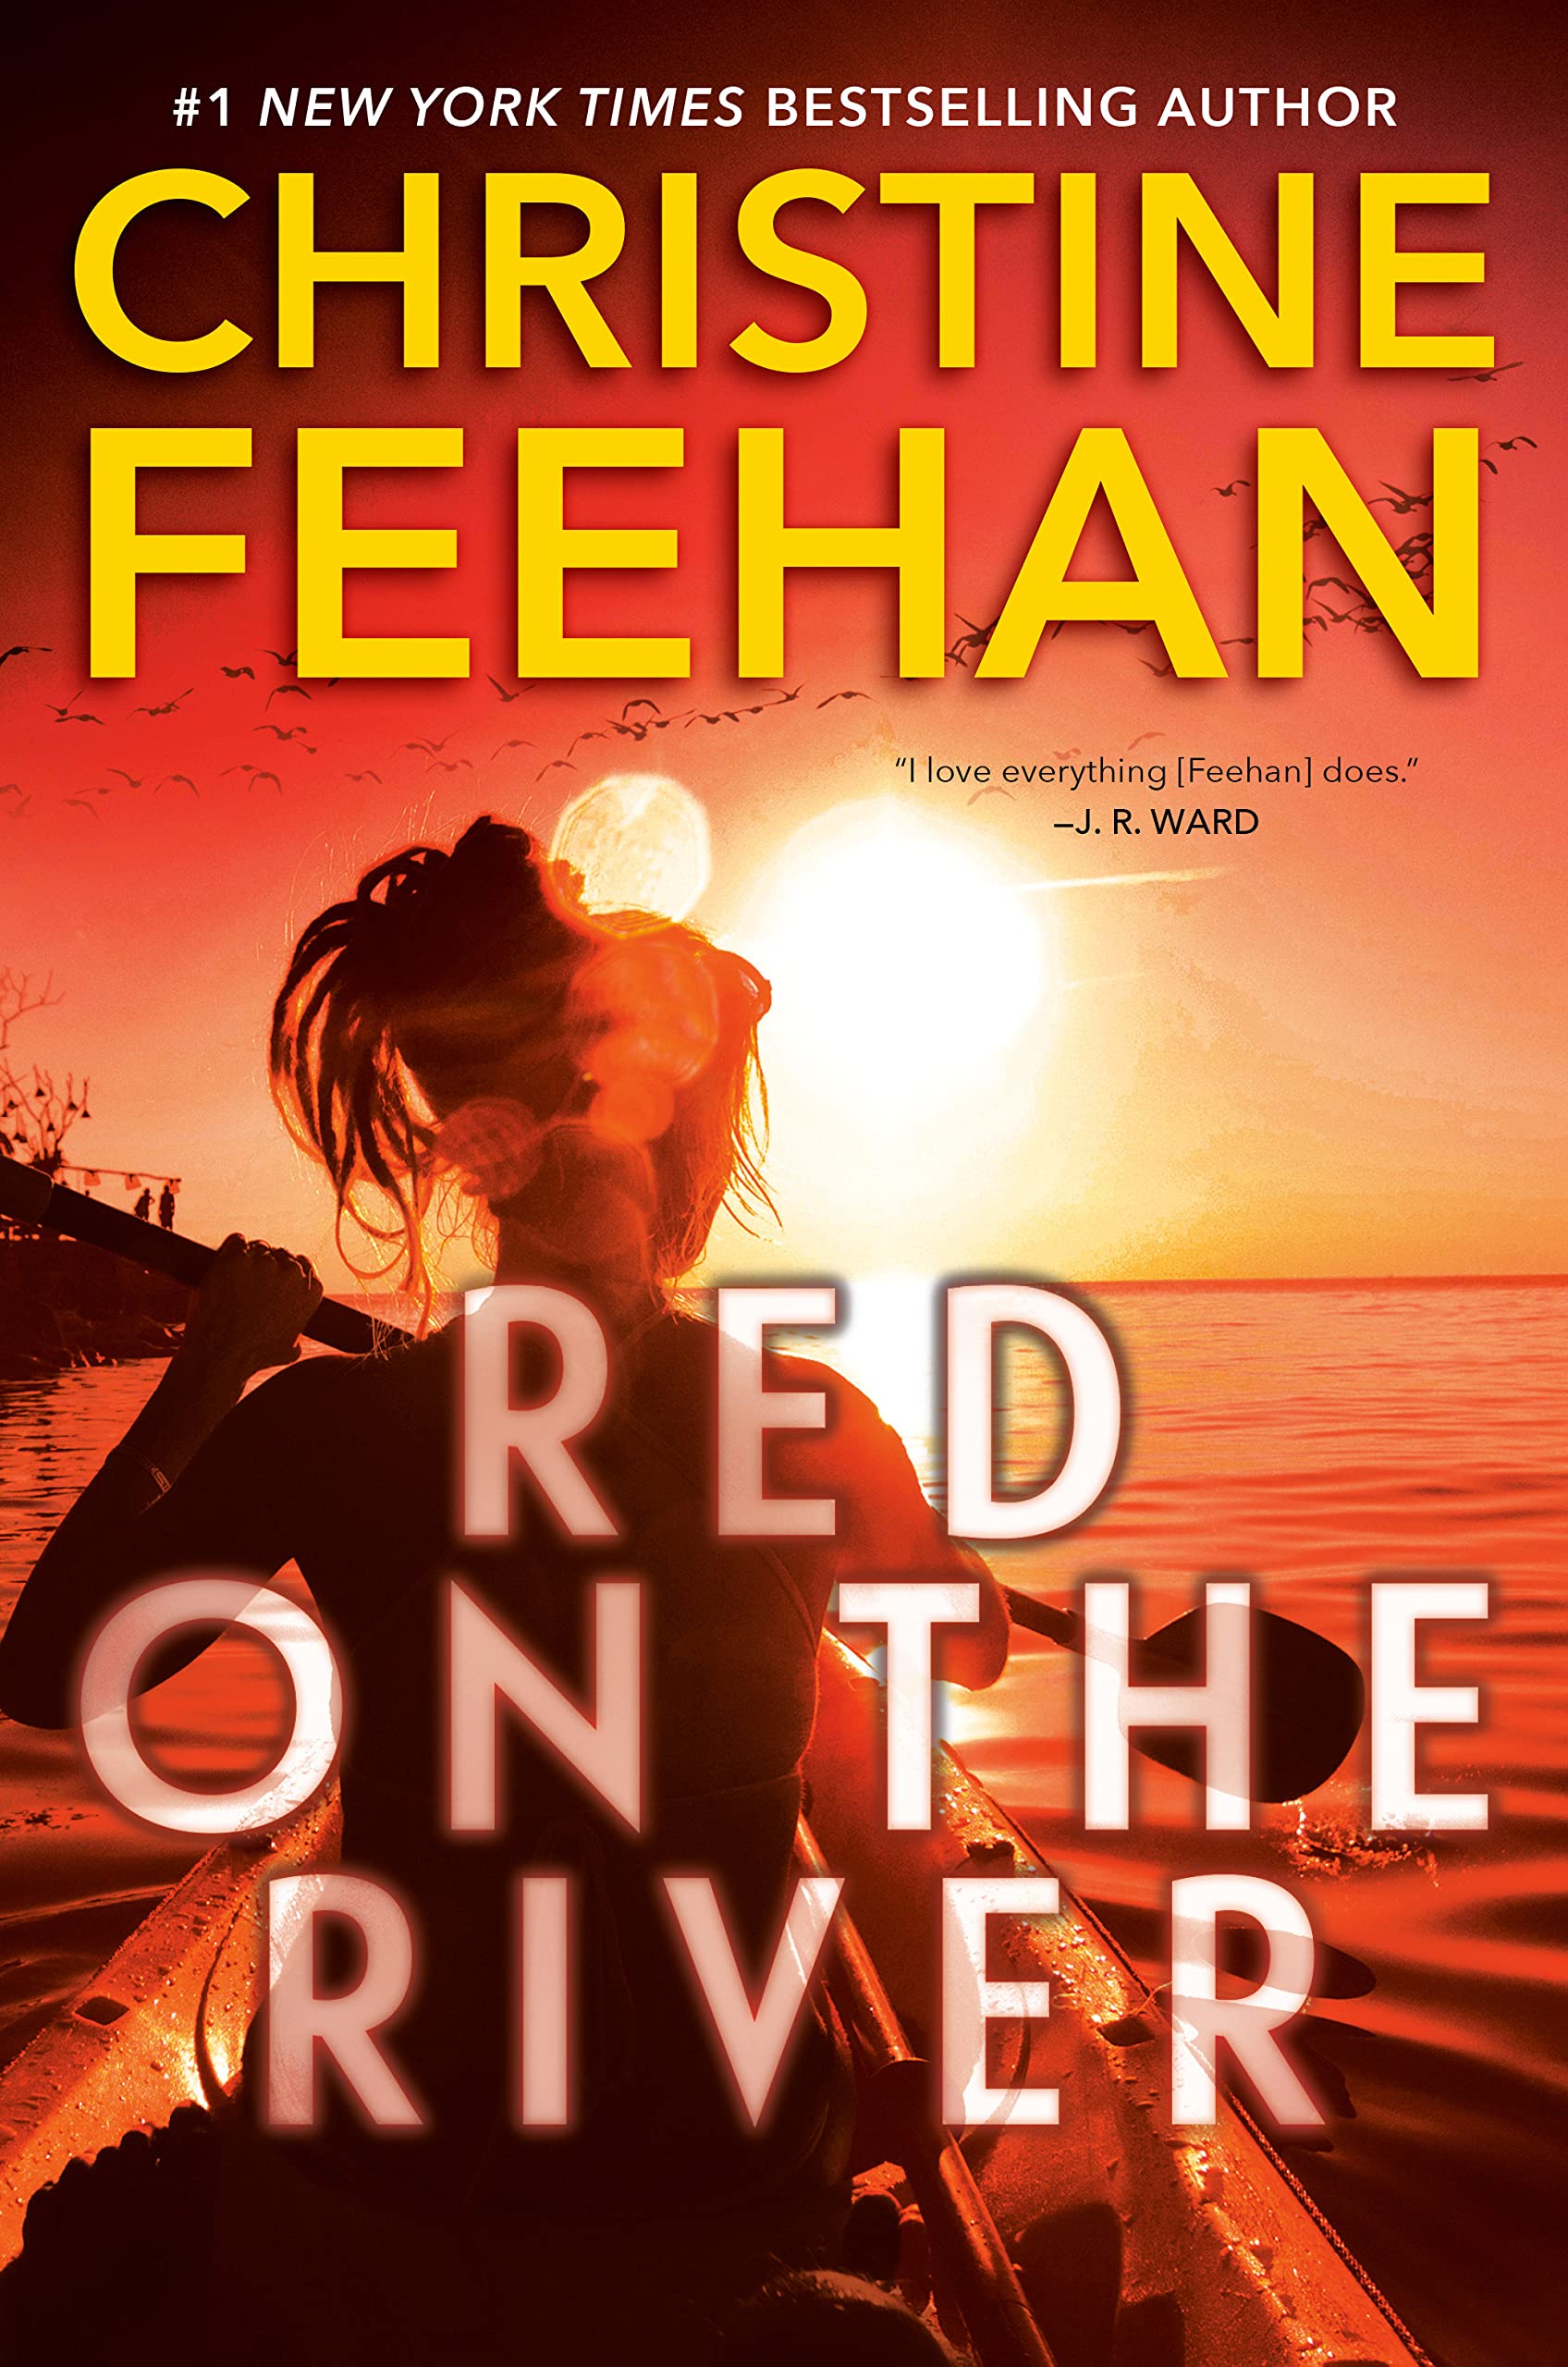 Image for "Red on the River"